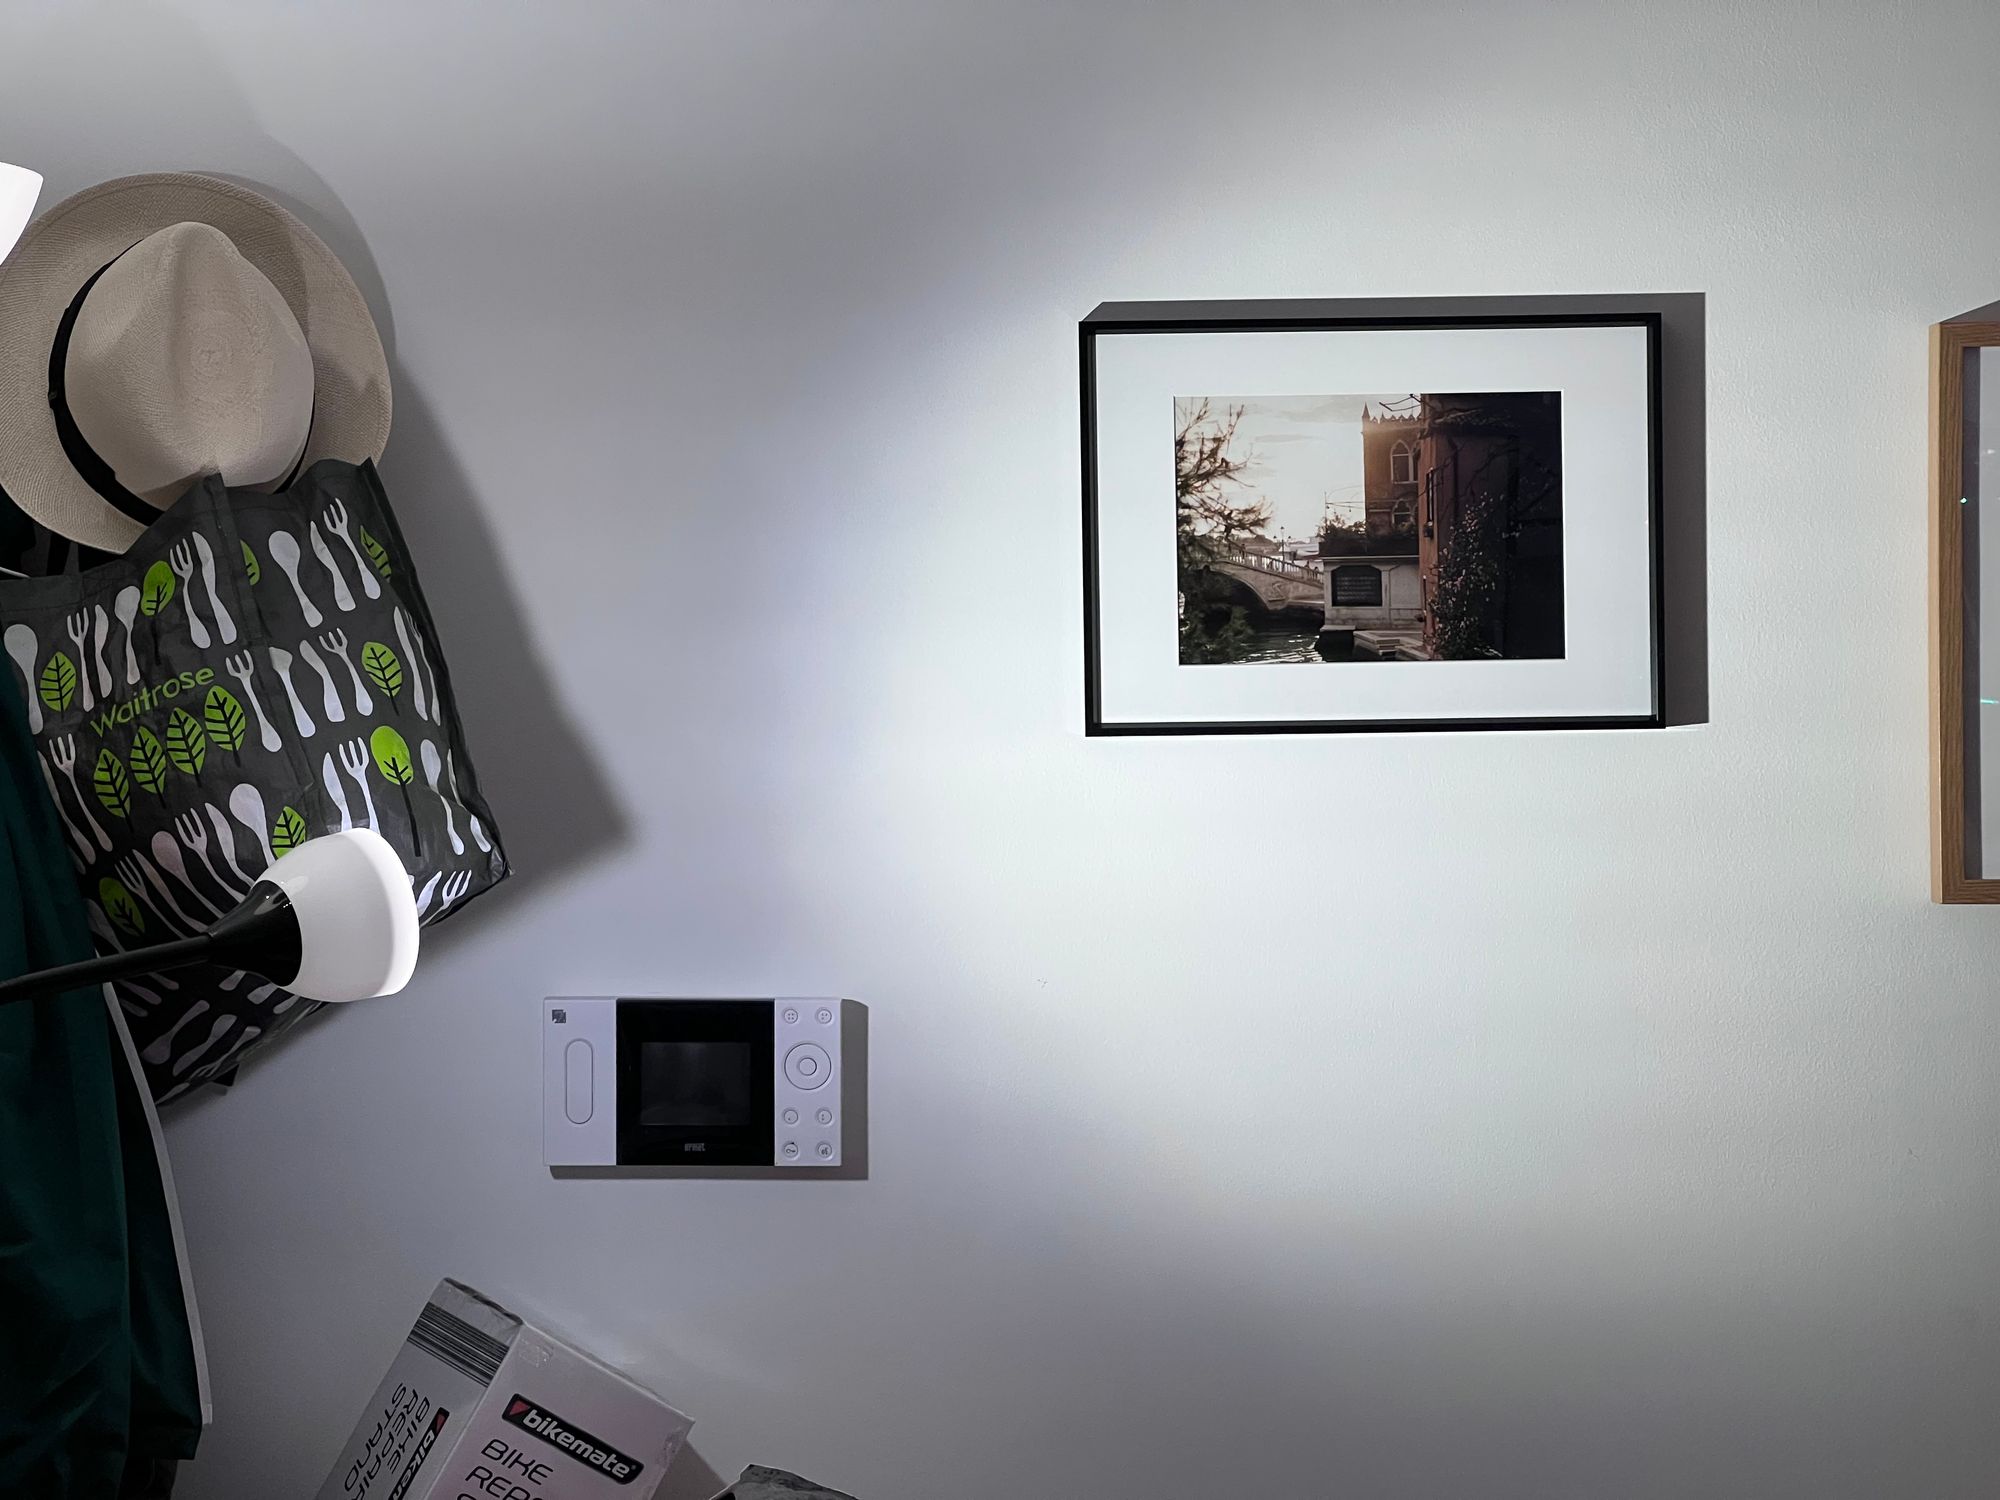 A white wall in a flat with a door intercom, the top of a box containing a bike repair stand, a straw hat and a bag for life hanging from coat hooks. In a black frame with a white mounting, a photo in the golden hour from Venice, of a bridge over a canal with a tree on one side and a creeping plant with pink flowers sticking to the terracotta coloured wall of the building on the right.